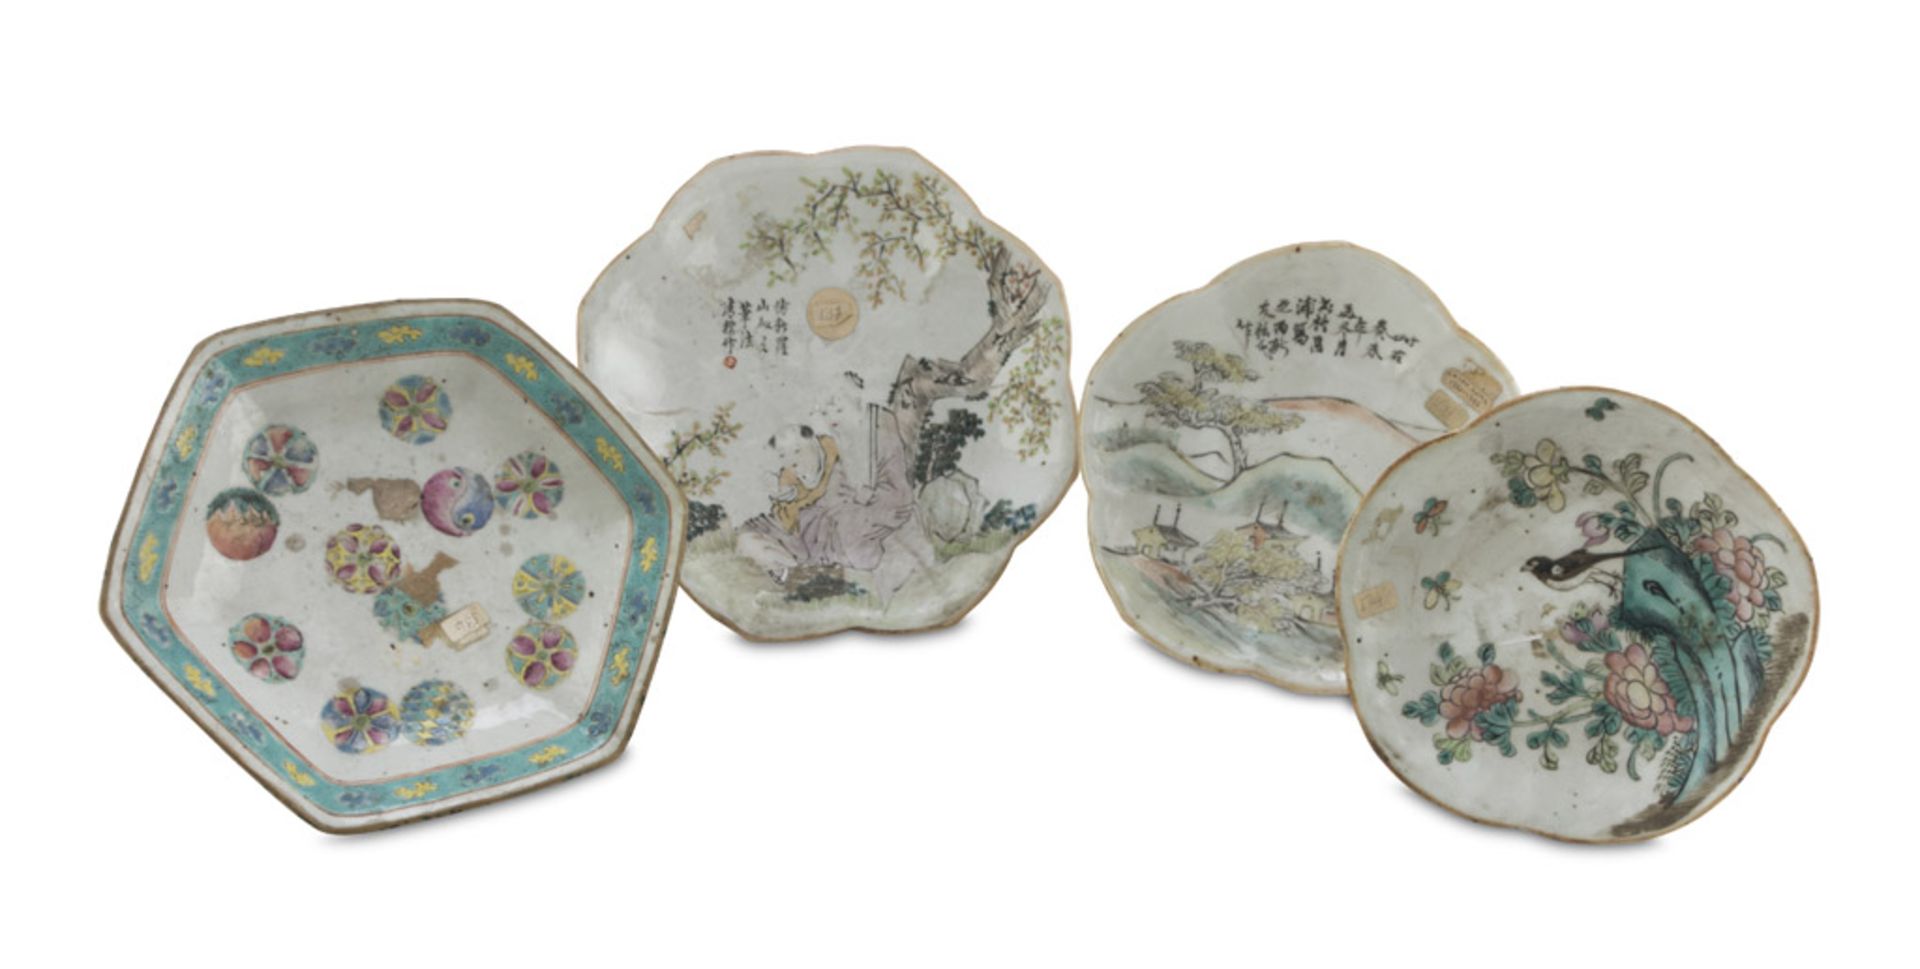 FOUR POLYCHROME ENAMELLED PORCELAIN STANDS, China LATE 19th, EARLY 20TH CENTURY decorated with